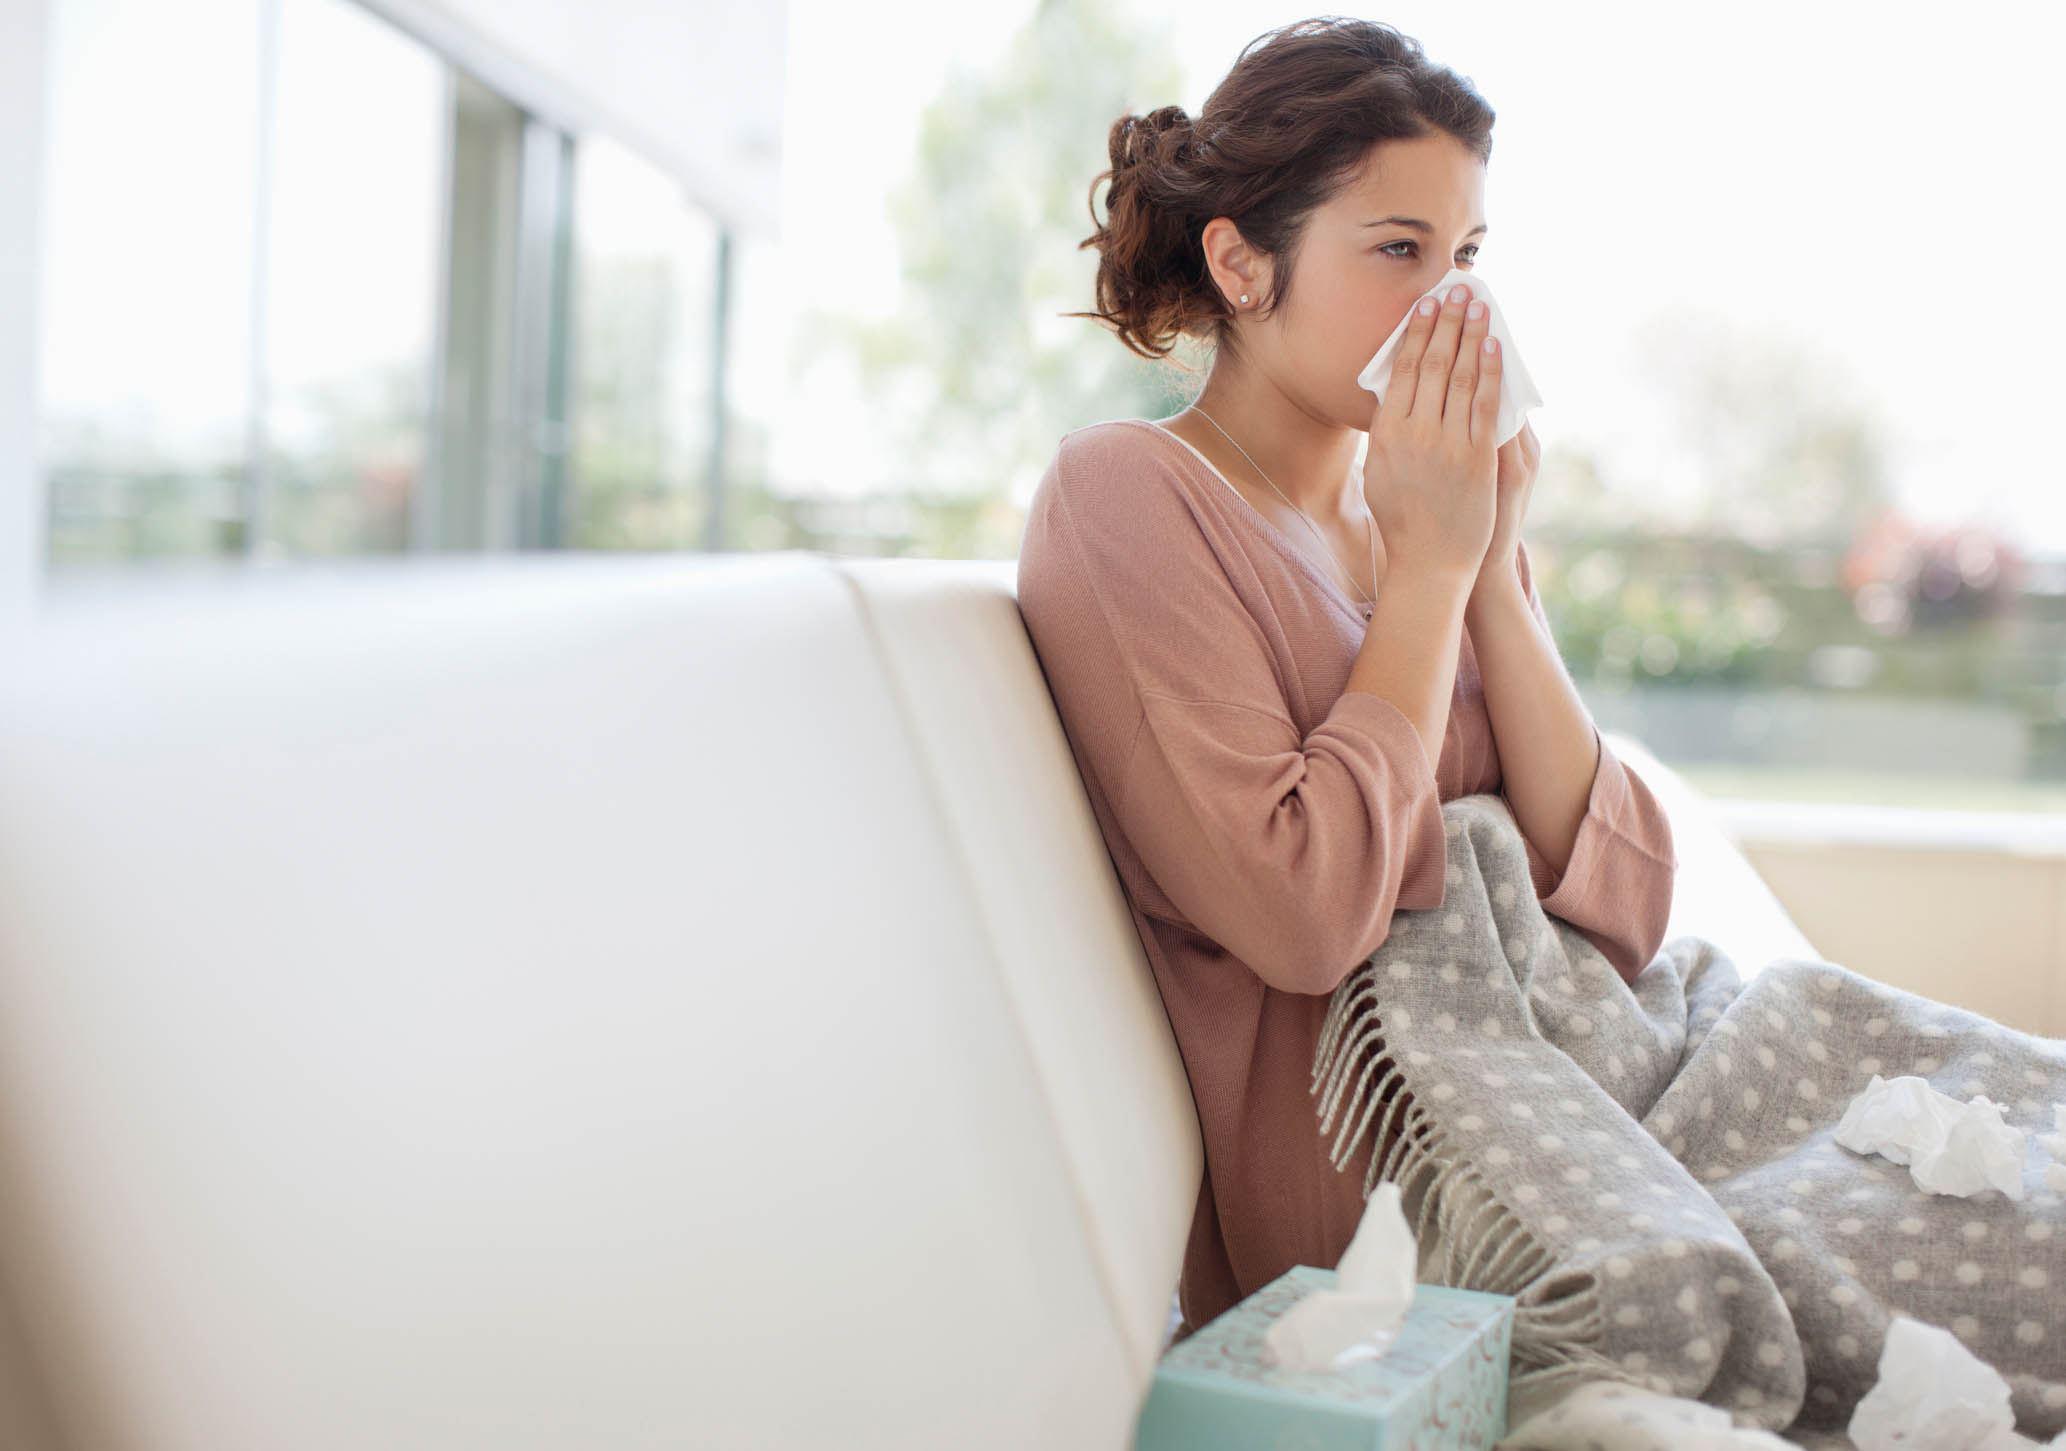 Can’t Escape Allergies, Even in Your Home?